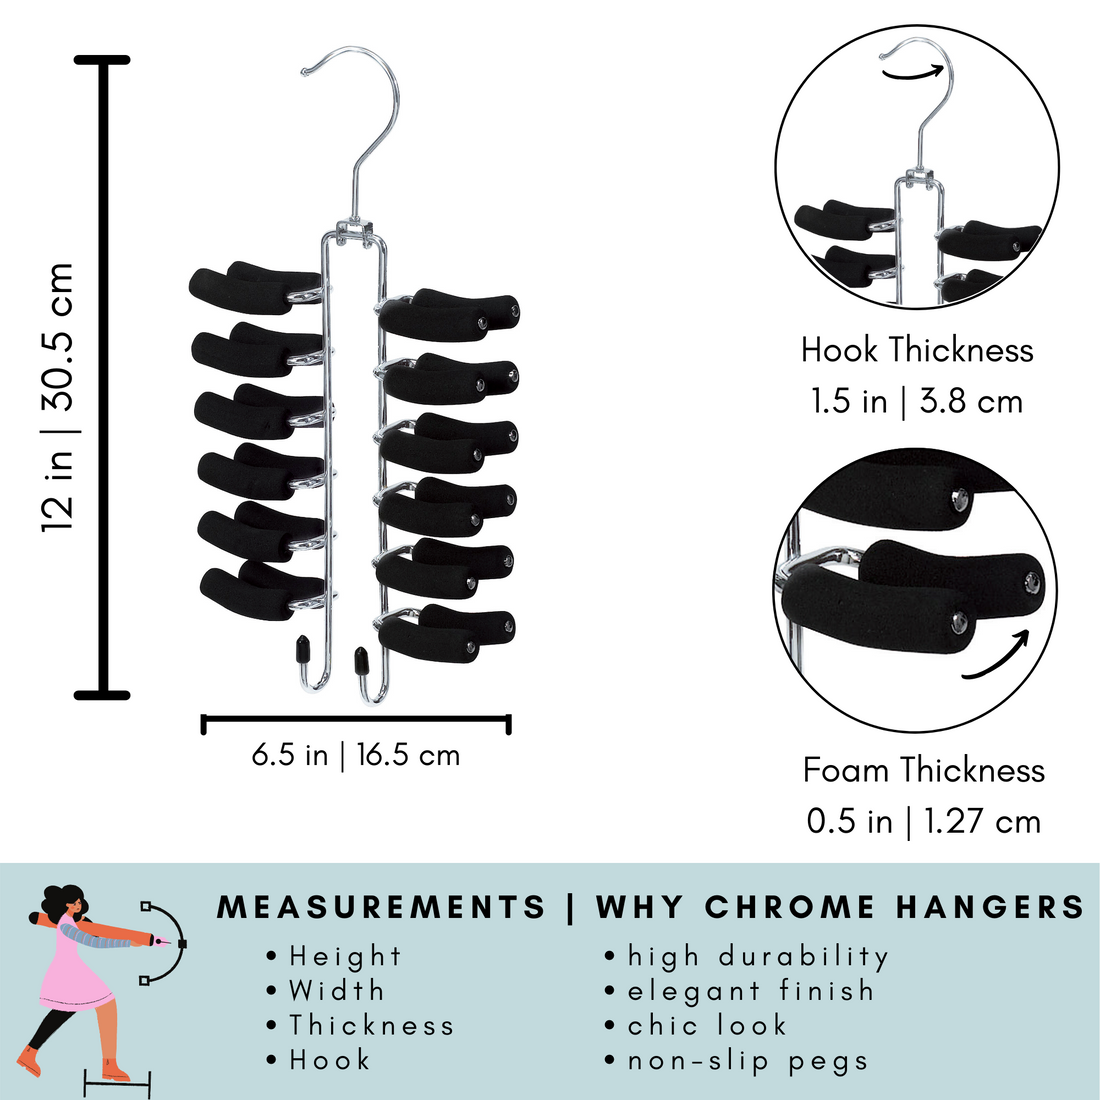 chrome tie hangers, tie hangers with 24 non slip pegs to hang 24 ties with extra  2 hooks for belt and other accessories